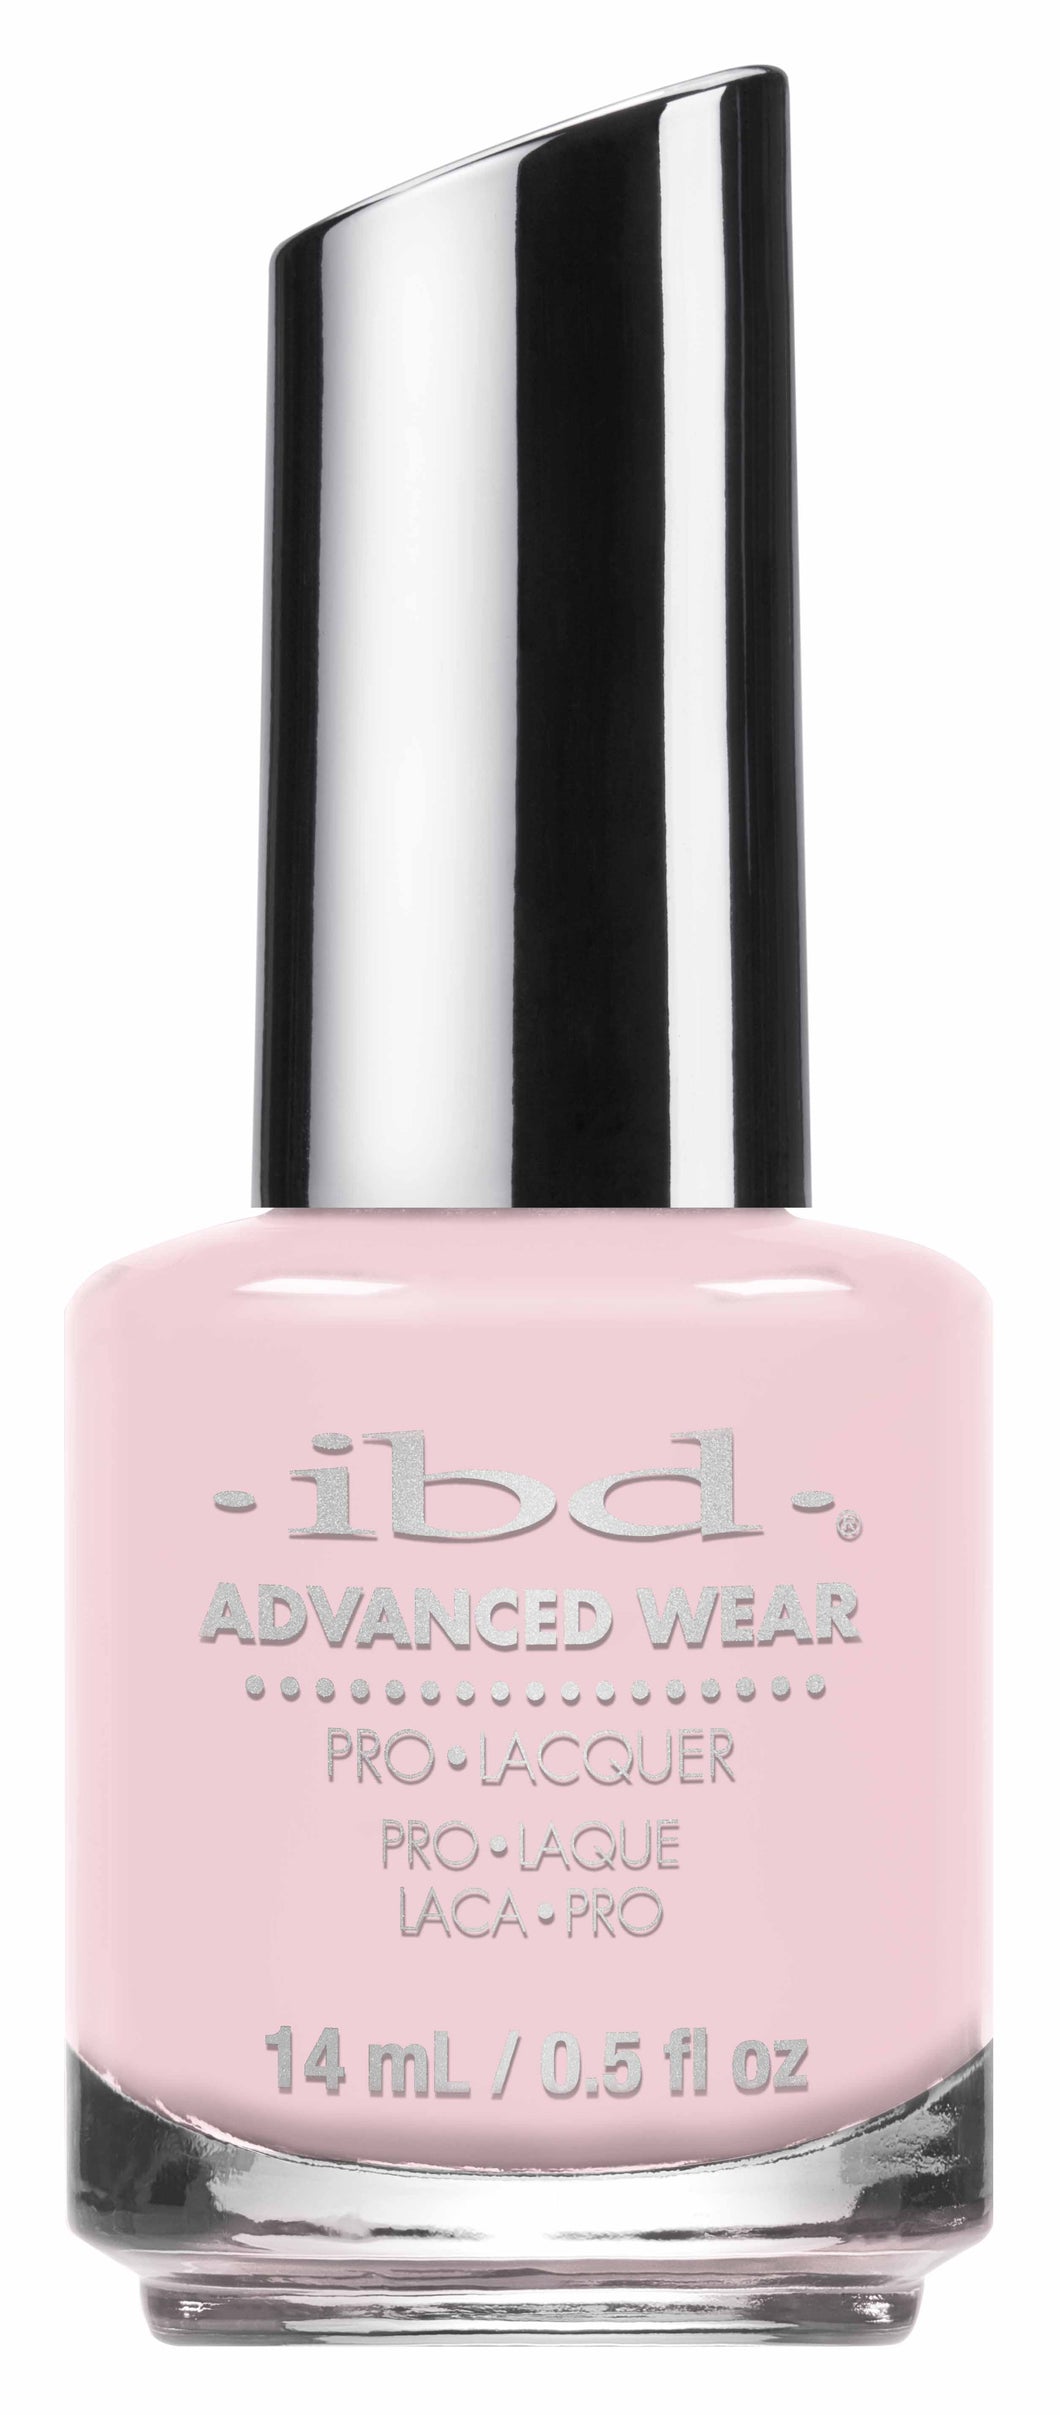 ibd Advanced Wear Lacquer 14ml - Pink Putty